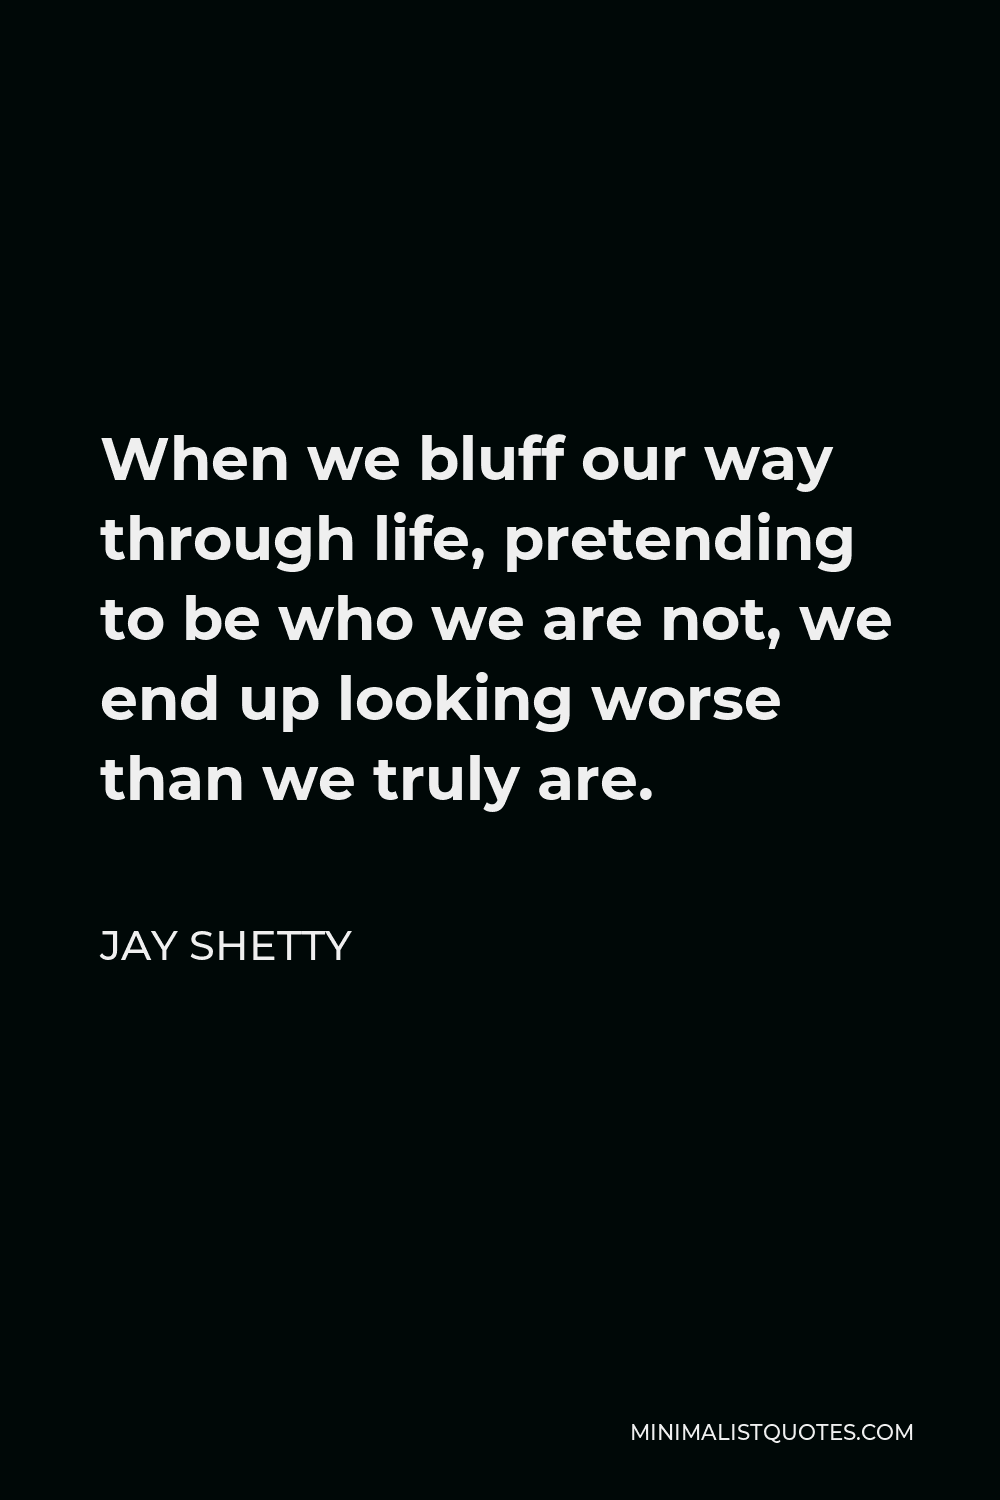 Jay Shetty Quote - When we bluff our way through life, pretending to be who we are not, we end up looking worse than we truly are.